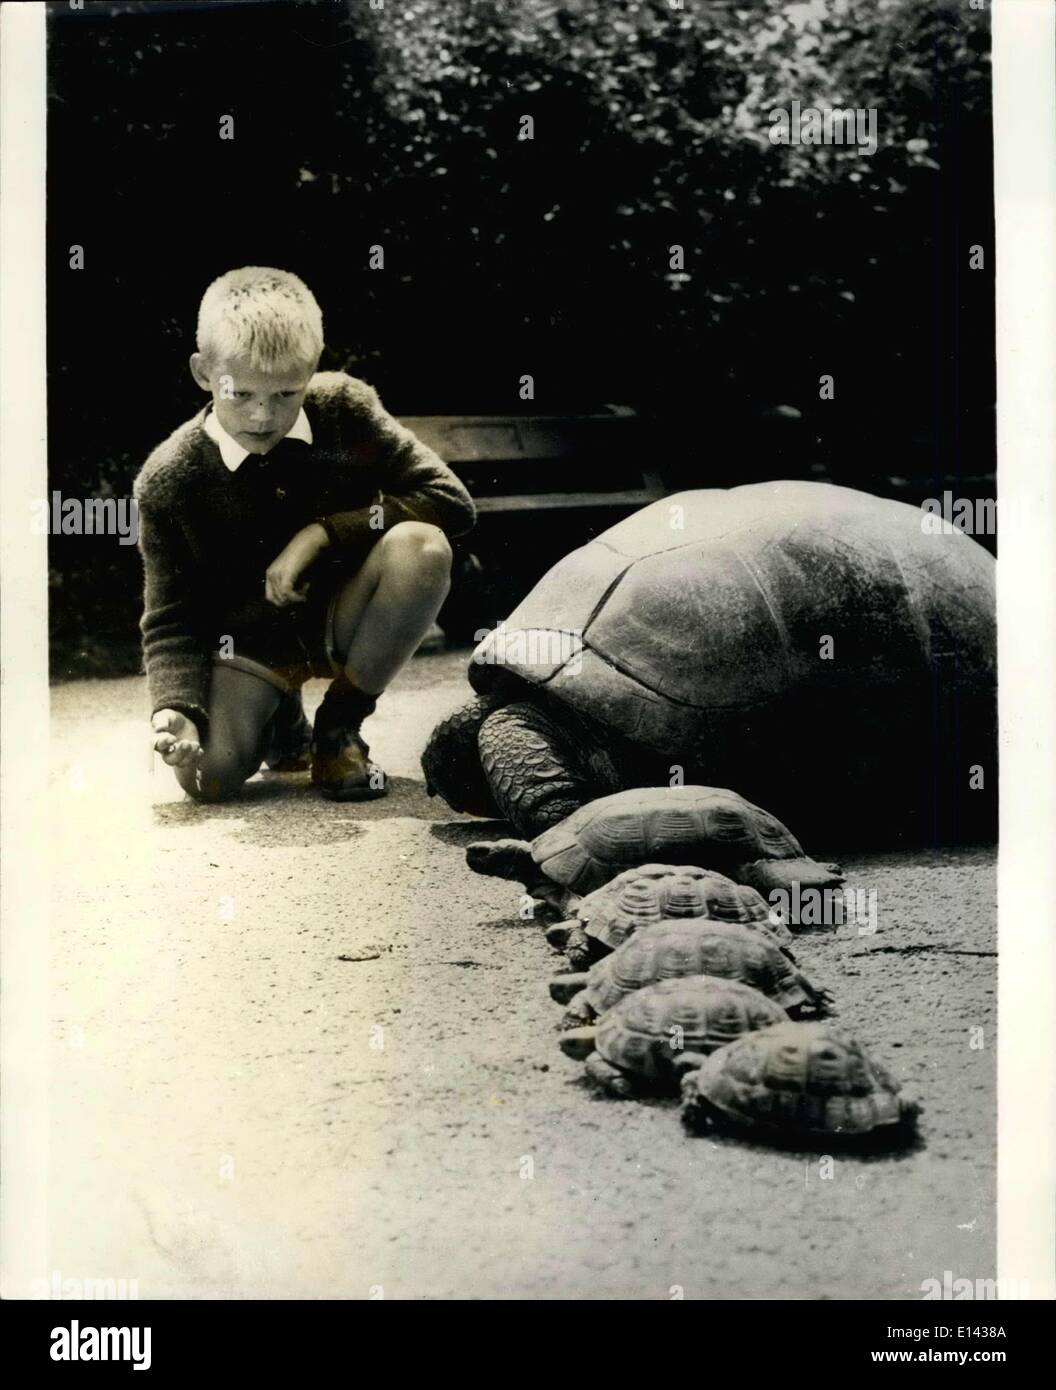 Mar. 31, 2012 - Not Much Chance Of These ''Jumping The Gun'': Step-watch in hand, young Karl- Heinz is ready for the star of the first preliminary heat in the tortoise -race organized by him in the Munich zoological gardens, Hellabrunn. It's unlikely that the tempting little plants waiting for the huge tortoise and her five ''fellow runners'' at the winning most will induce a ''flying stars'', however. Stock Photo